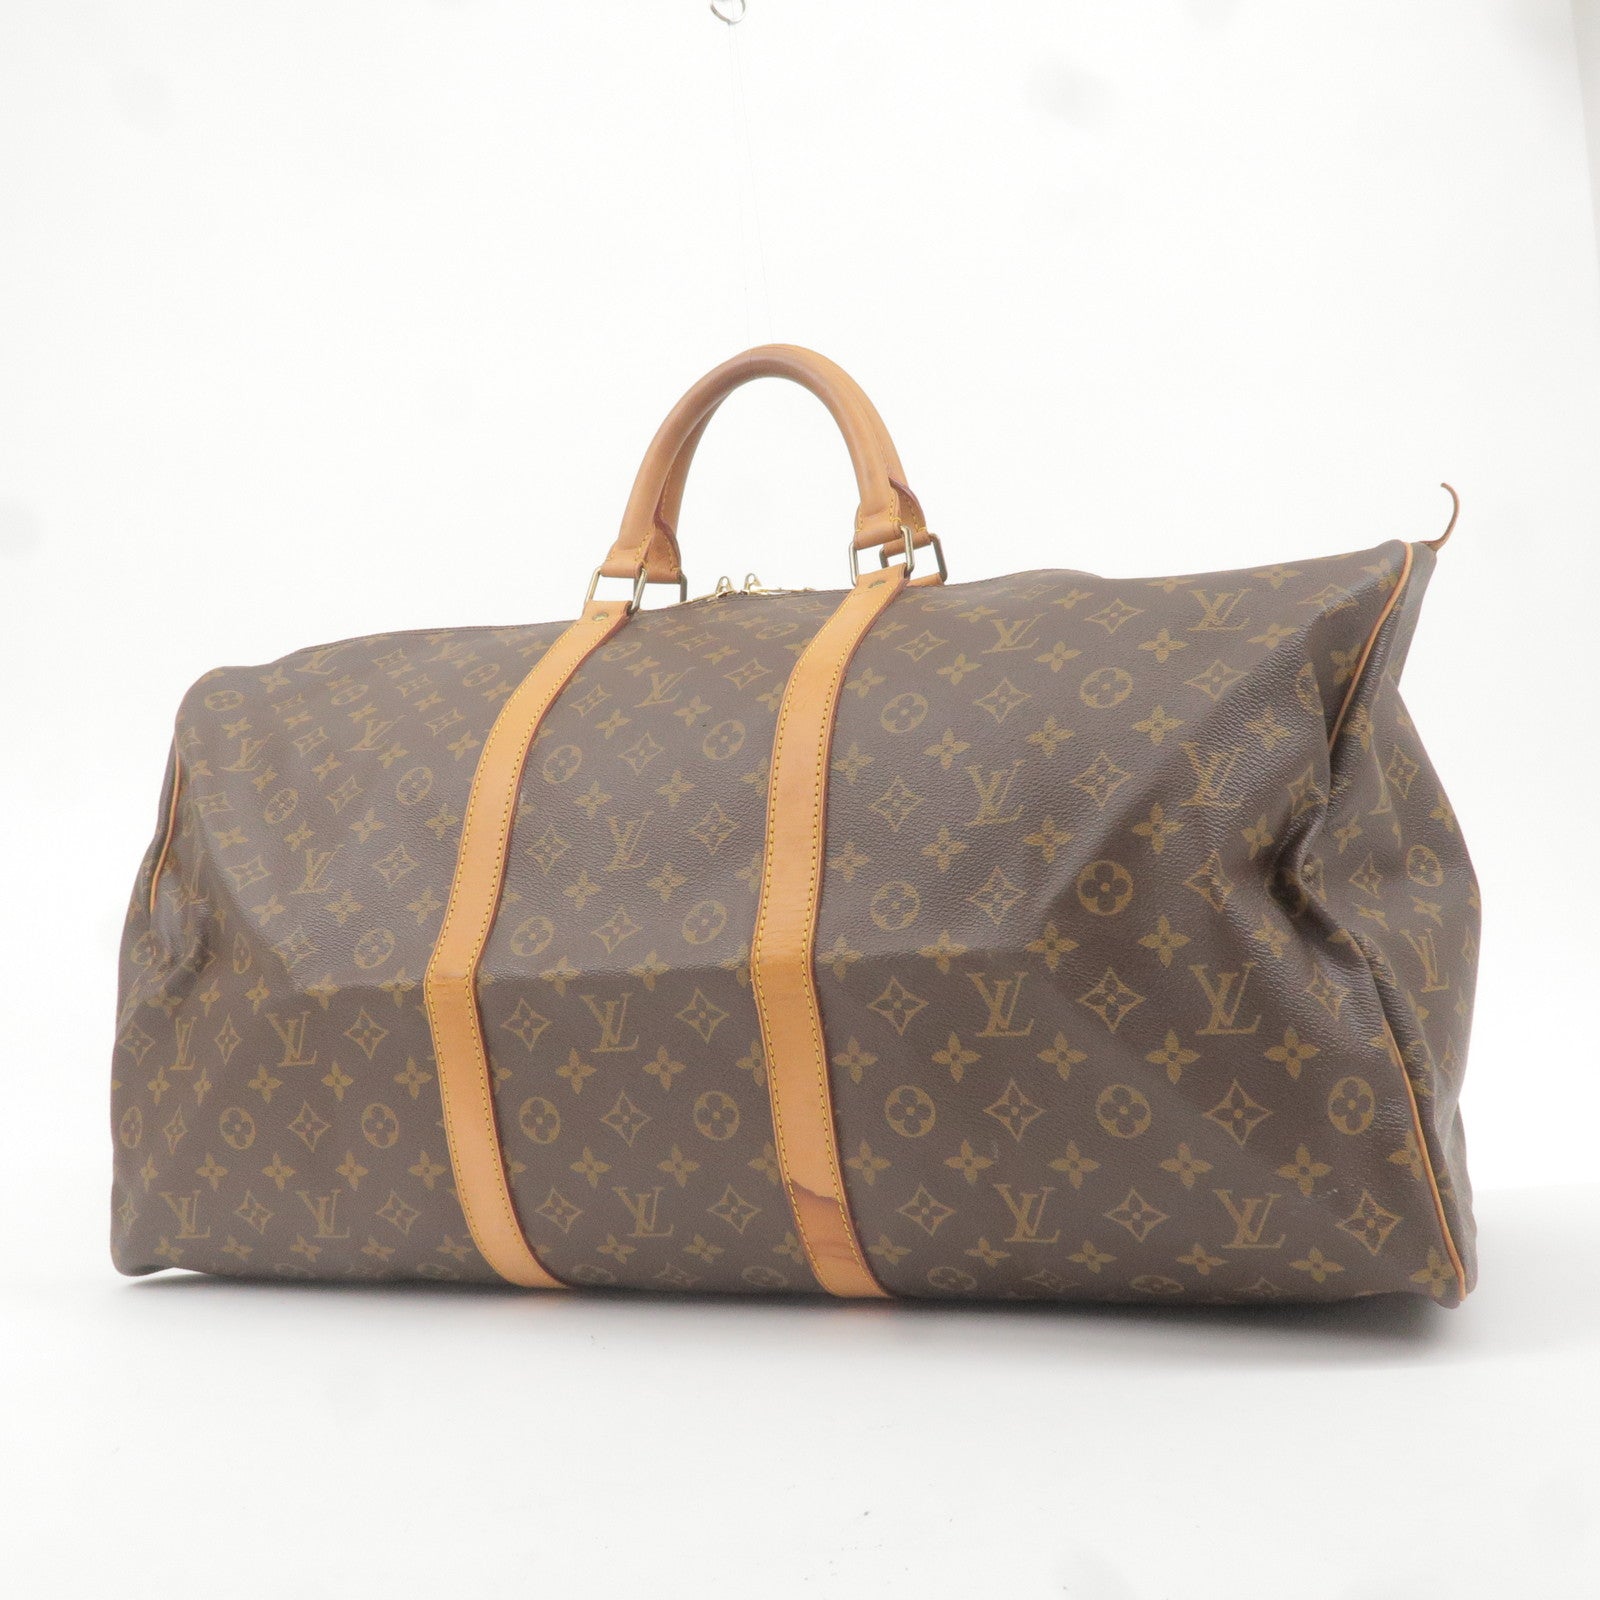 Louis Vuitton 1990-2000s pre-owned Monogram square-shaped Cosmetic